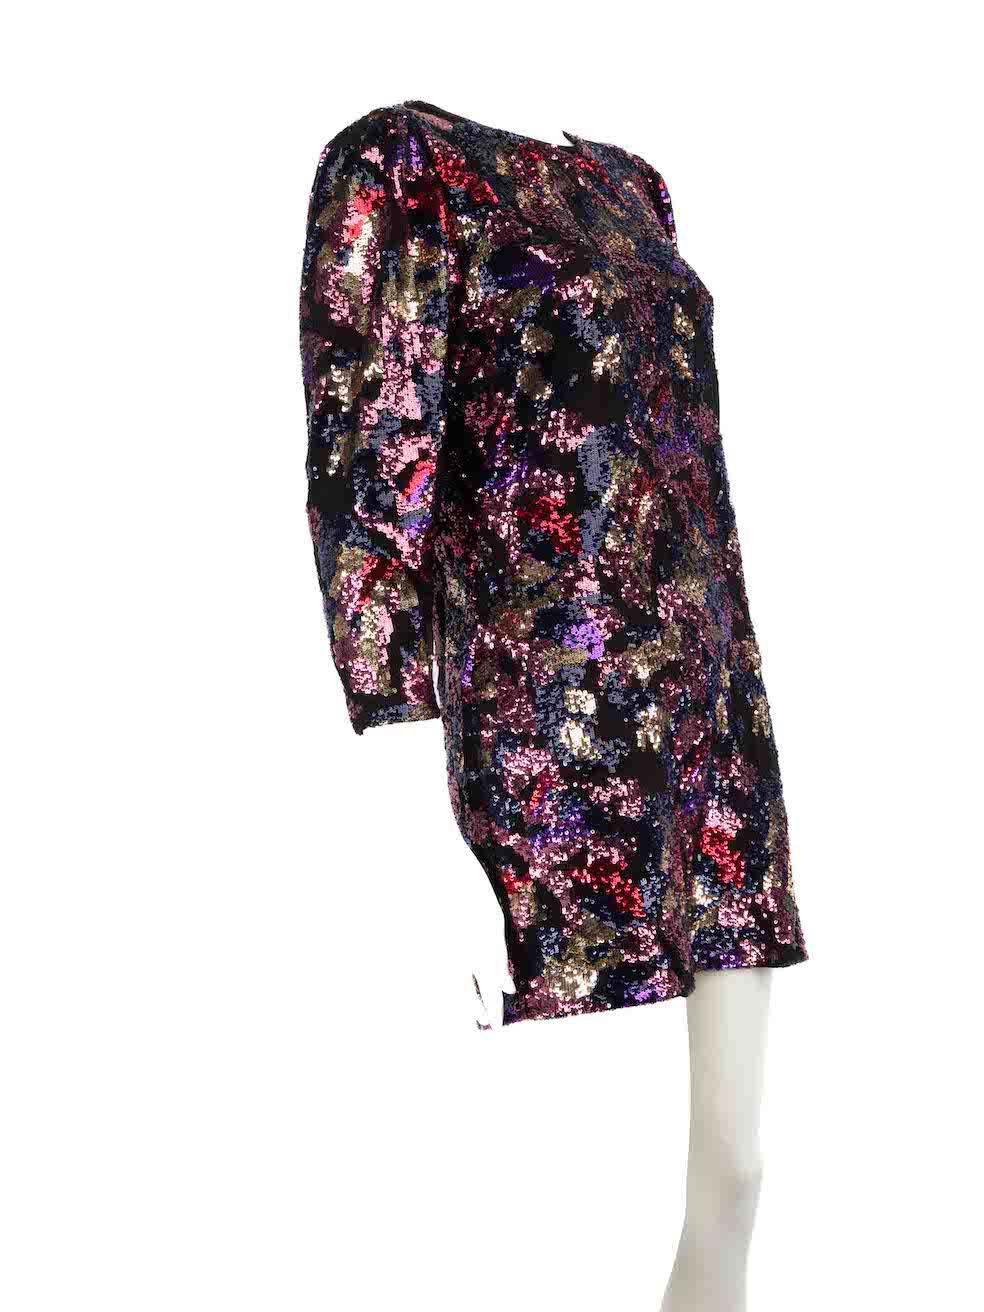 CONDITION is Very good. Minimal wear to dress is evident. Some small plucks to the stitching of the sequins on this used Iro designer resale item.
 
 
 
 Details
 
 
 Multicolour
 
 Polyester
 
 Mini dress
 
 Sequinned pattern accent
 
 Round